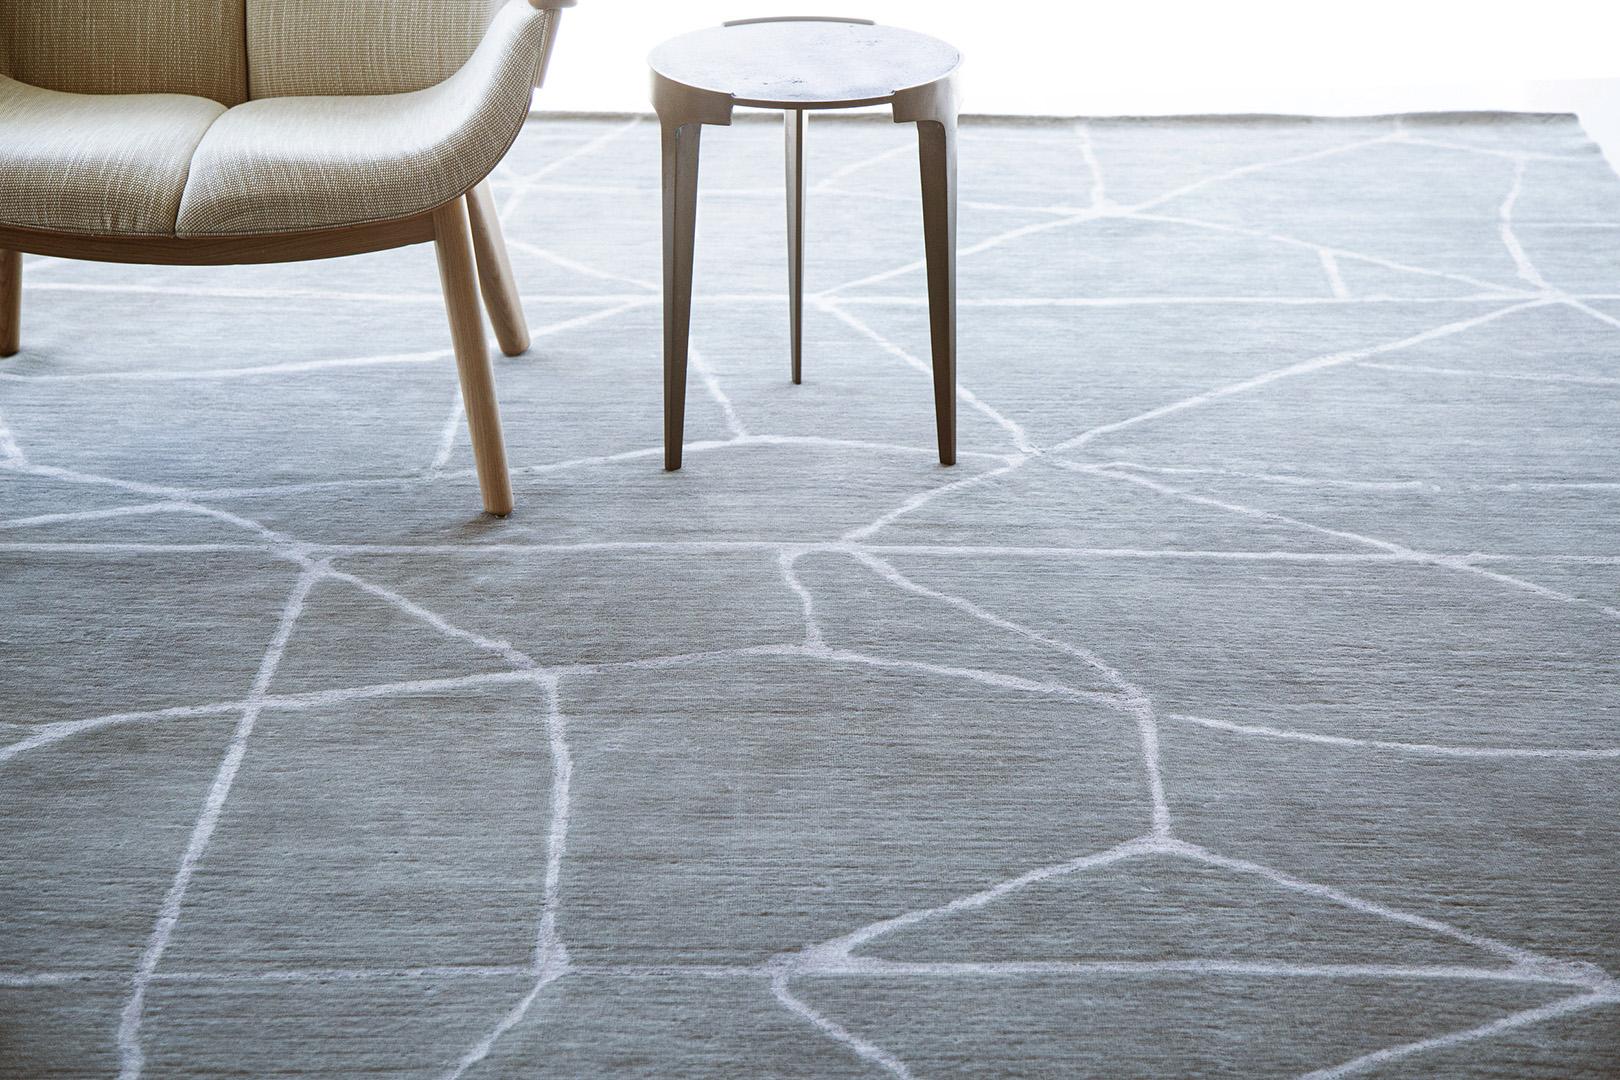 'Release' is a handwoven modern abstract rug made of wool and silk. It is a part of the Design Rhymes Collection which pulls inspiration from different aspects of architecture. The contrasting white lines creating cracks through the slate grey rug